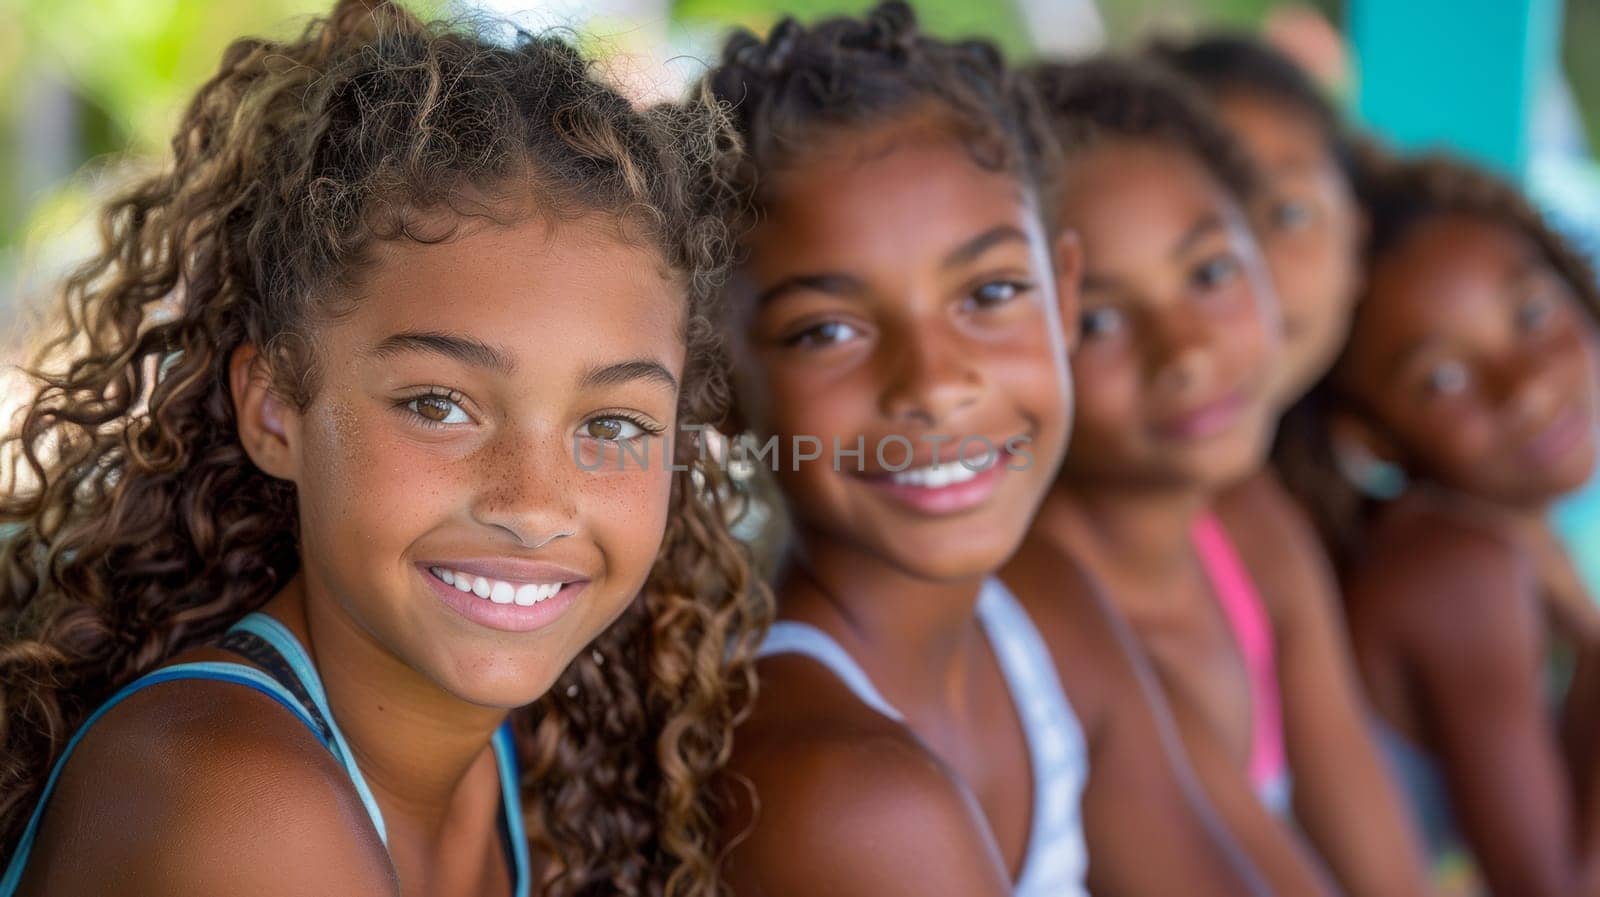 A group of young girls with curly hair smiling for the camera